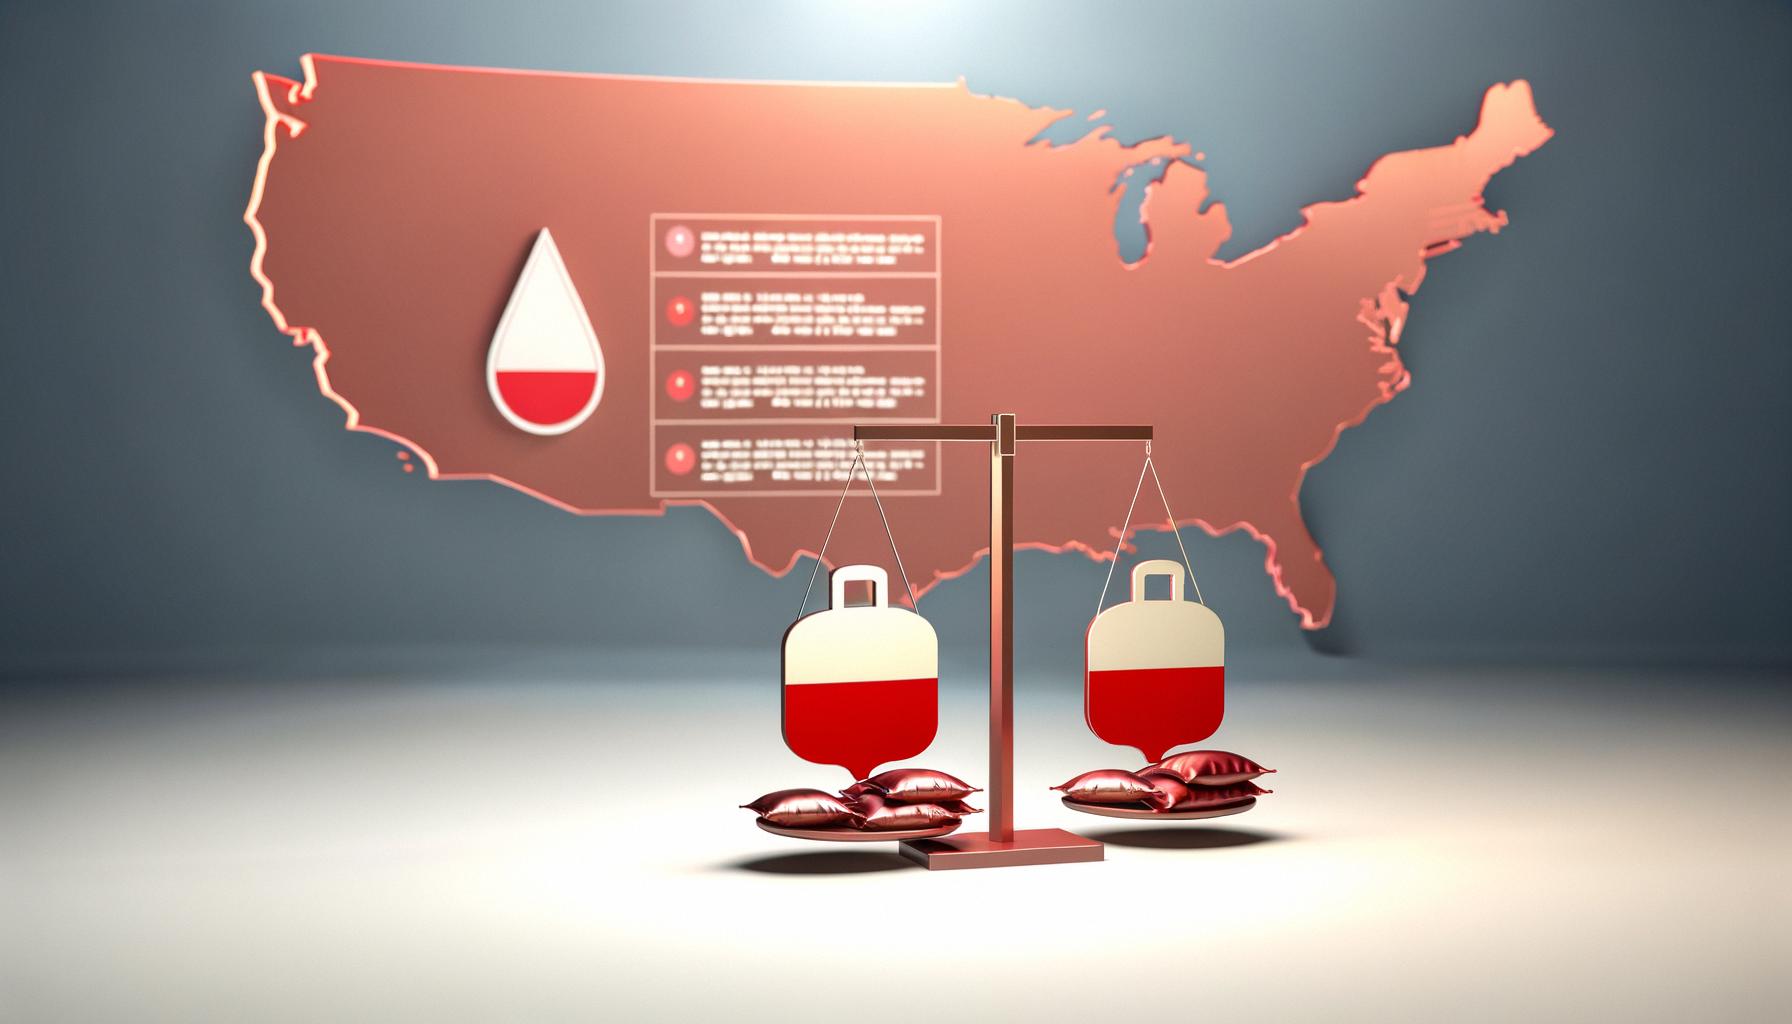 National blood shortages are severe